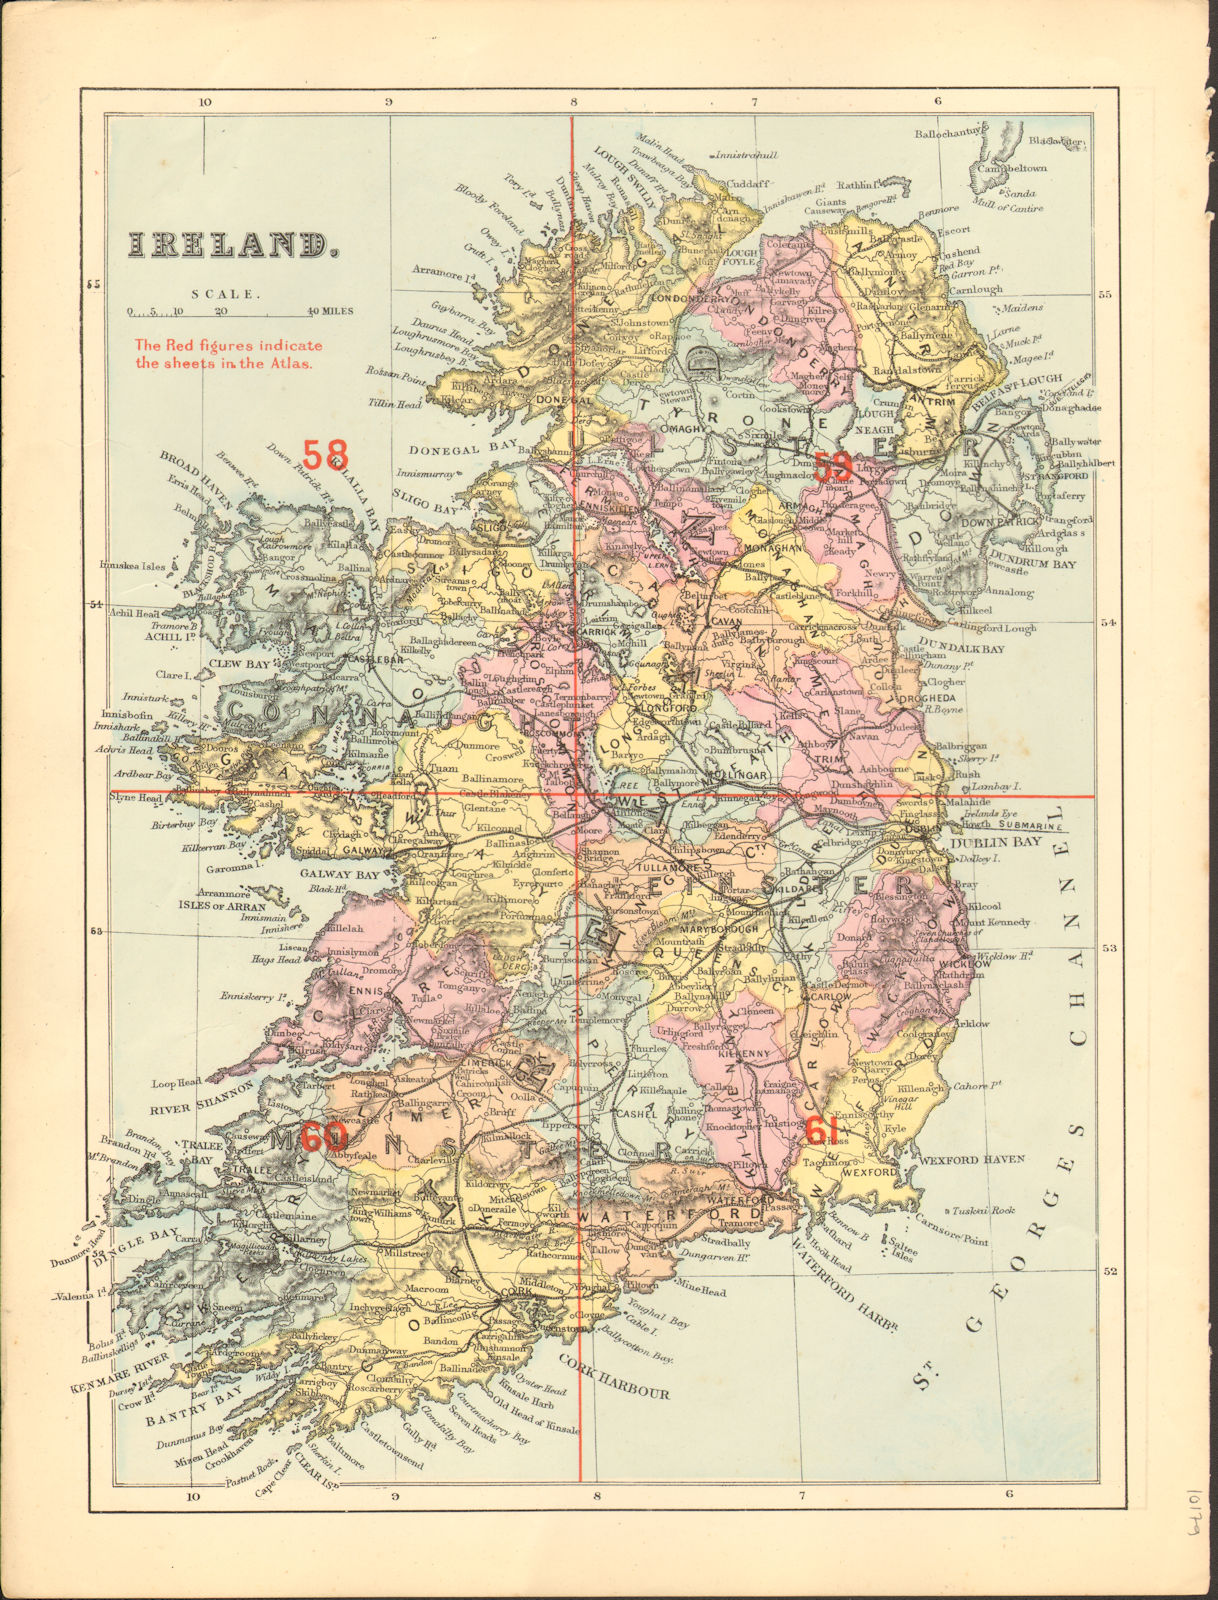 IRELAND. Antique index map by GW BACON 1884 old vintage plan chart